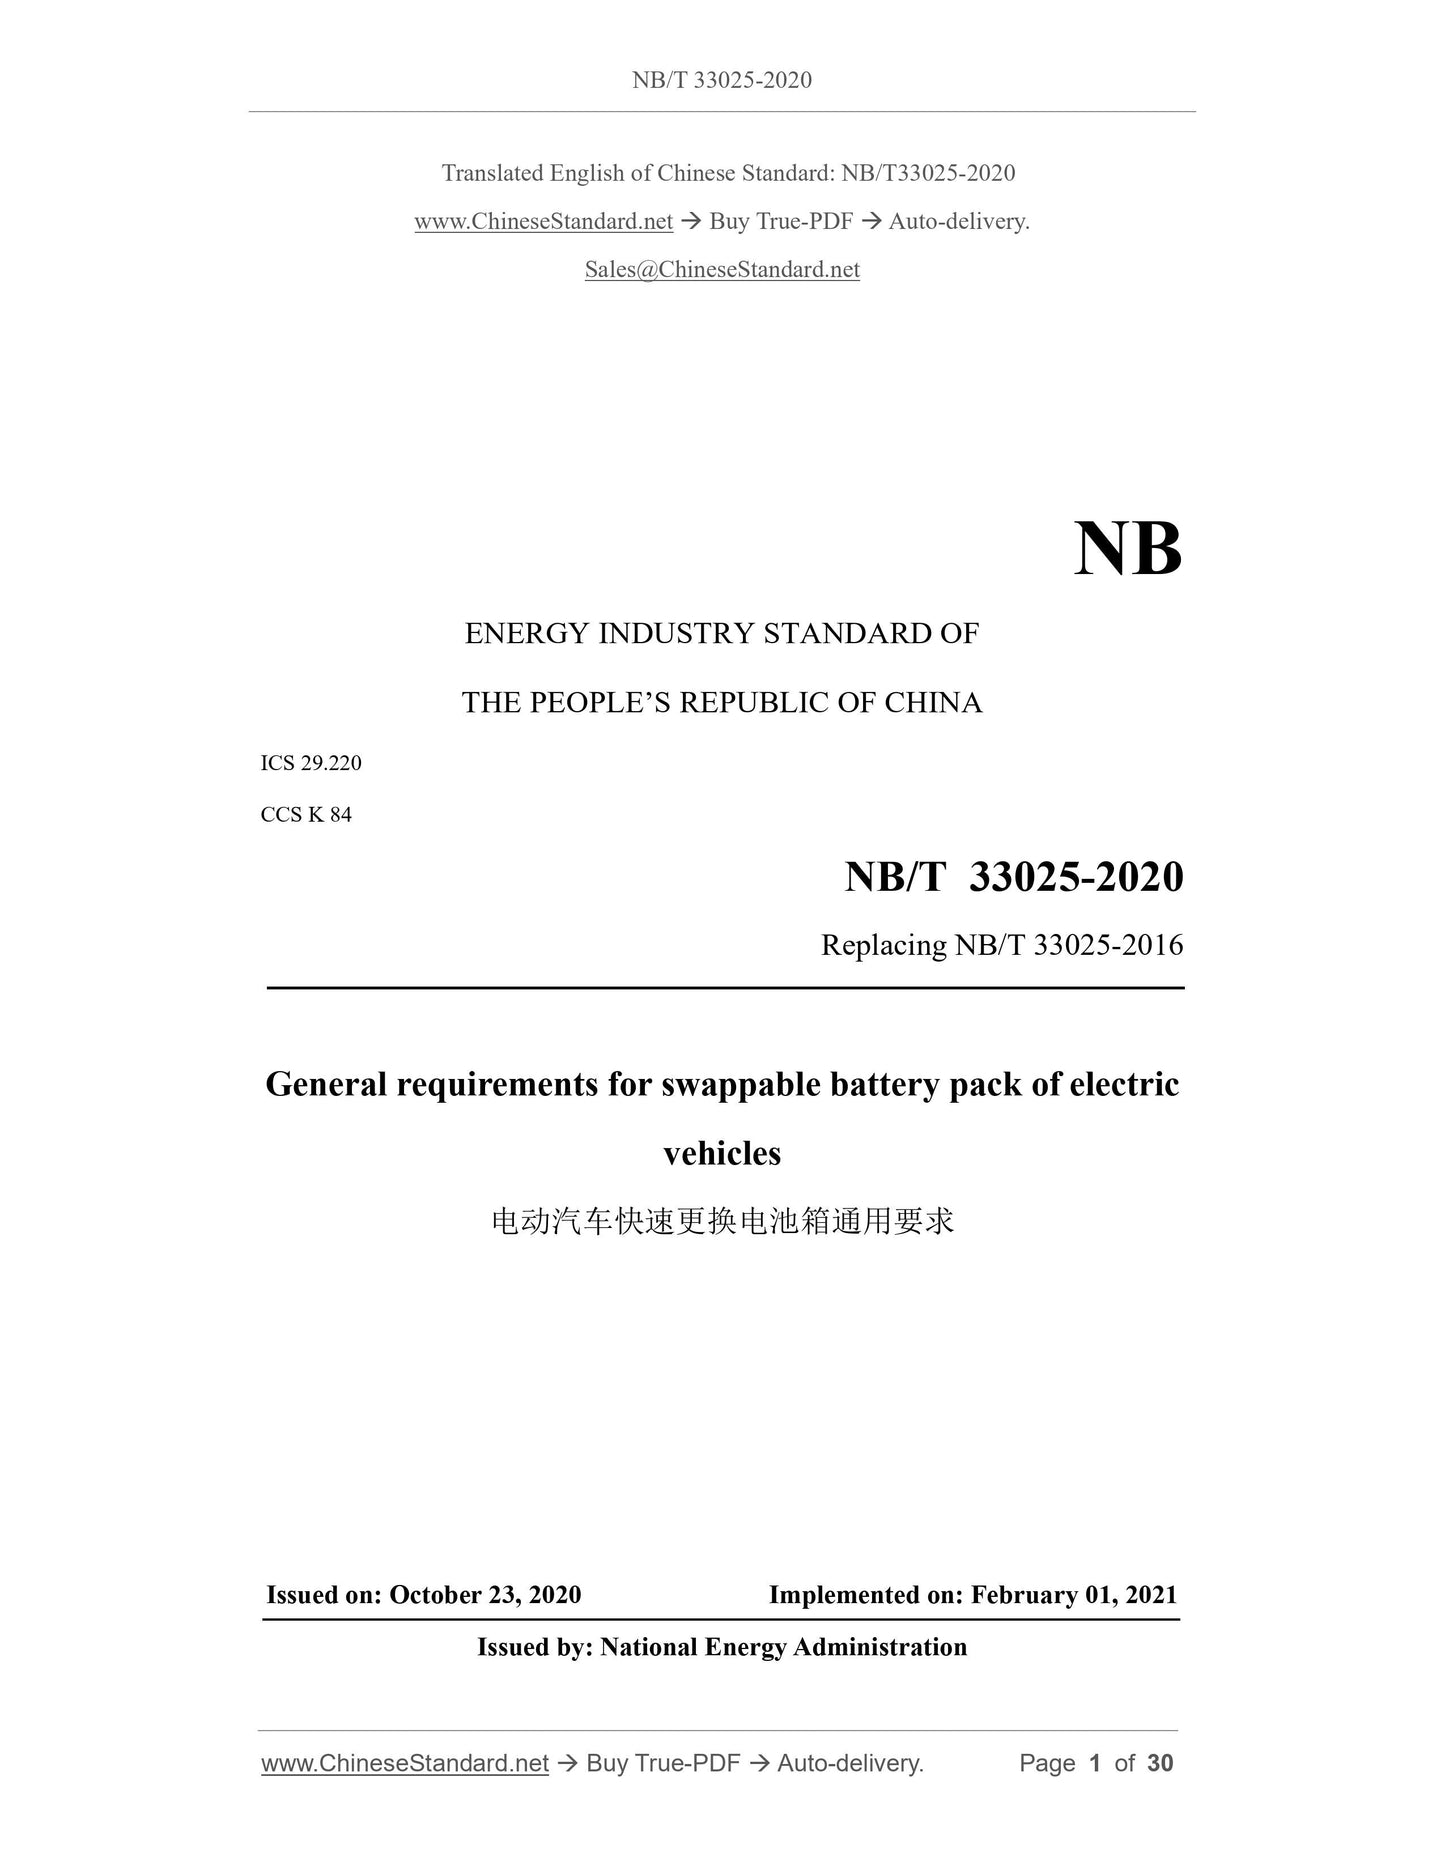 NB/T 33025-2020 Page 1